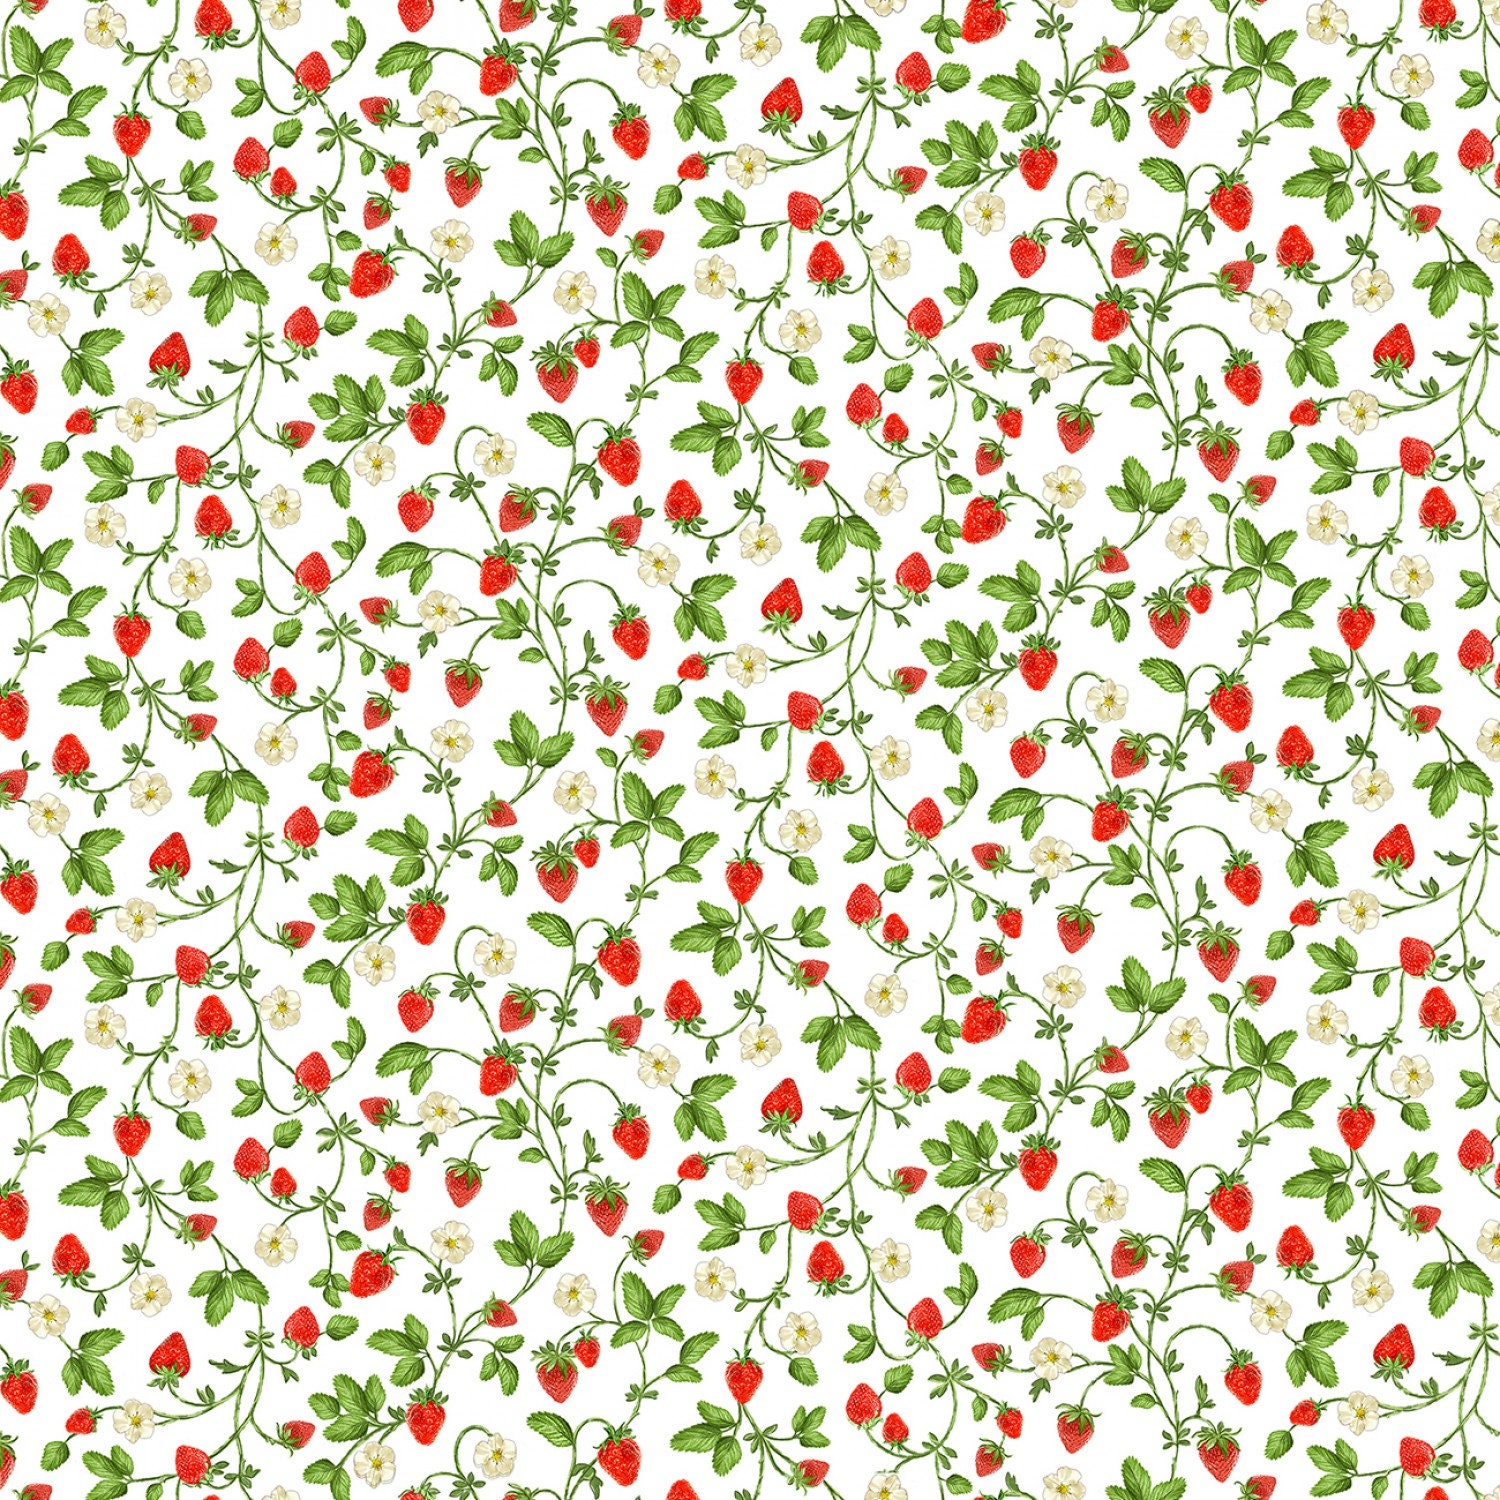 Strawberry Fields Forever Fabric White Background